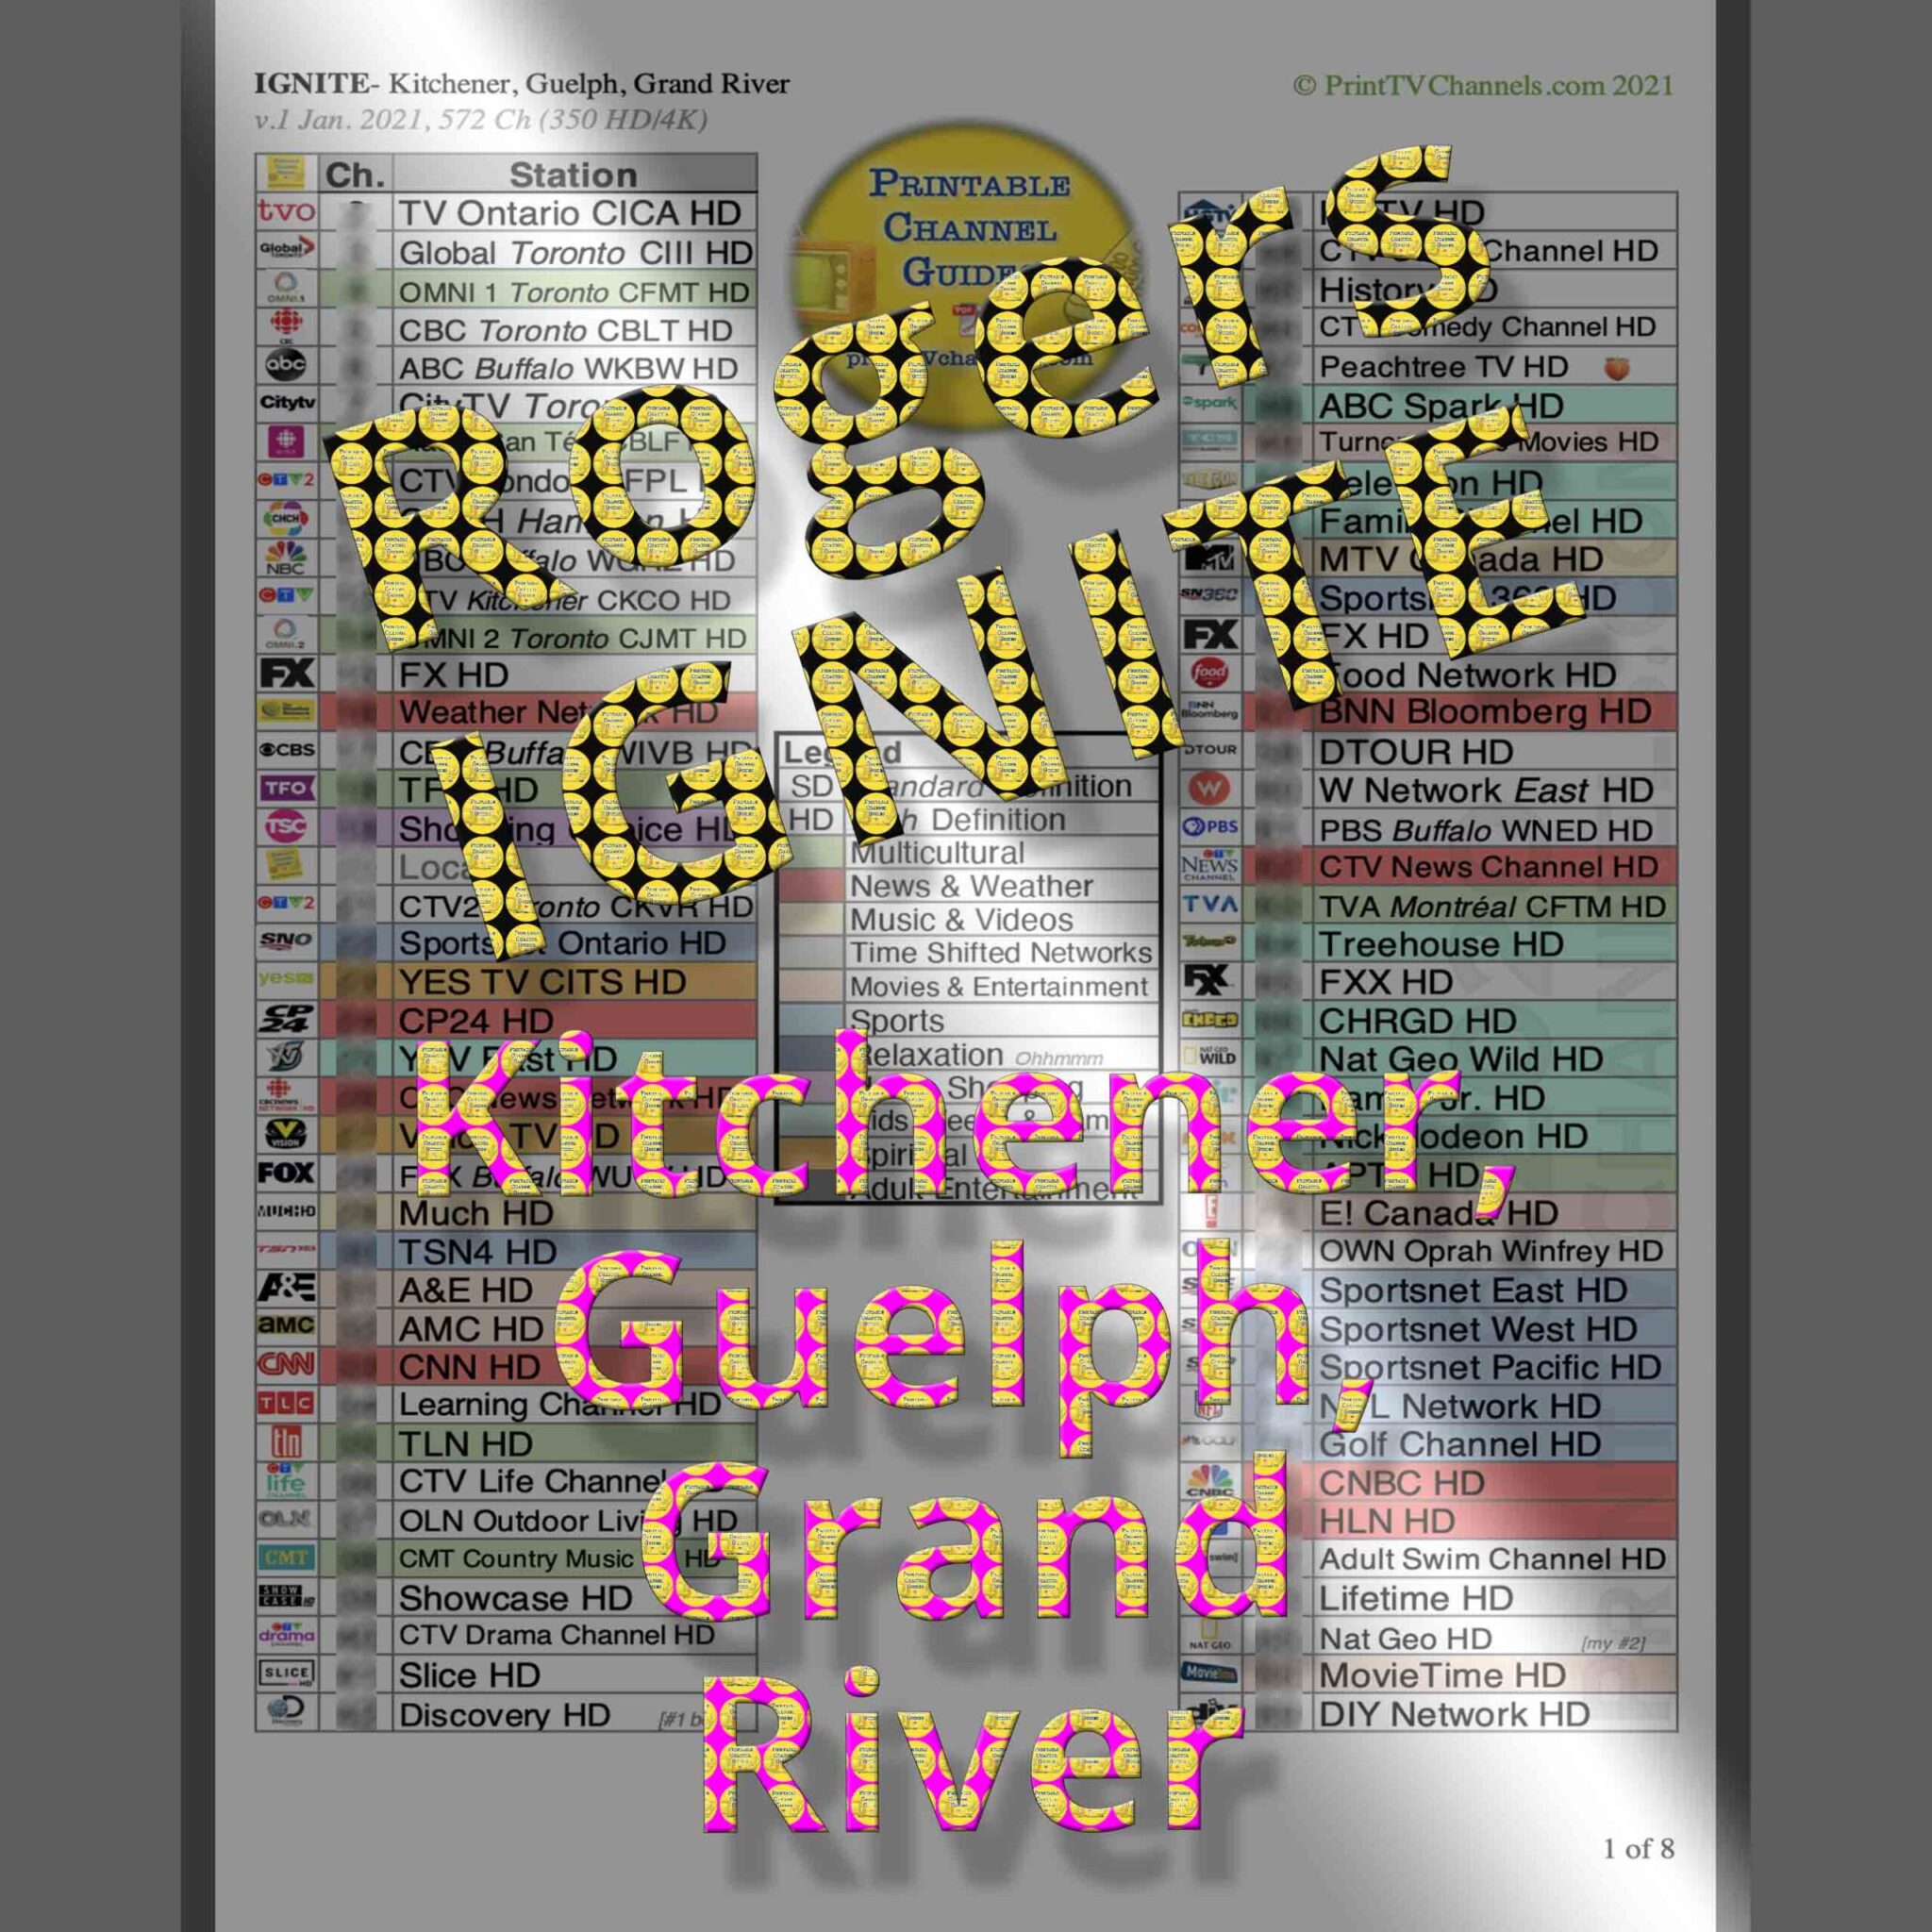 PREVIEW IMAGE: Rogers IGNITE TV Channel Guide for Kitchener, Guelph and Grand River, ON. The guide is well organized, arranged numerically by channel number and colour coded by genre. Makes it easy to view what you pay for. Comprised of 8 pages and 572 TV and music channels (350 are HD/4k). GTIN 616833846038